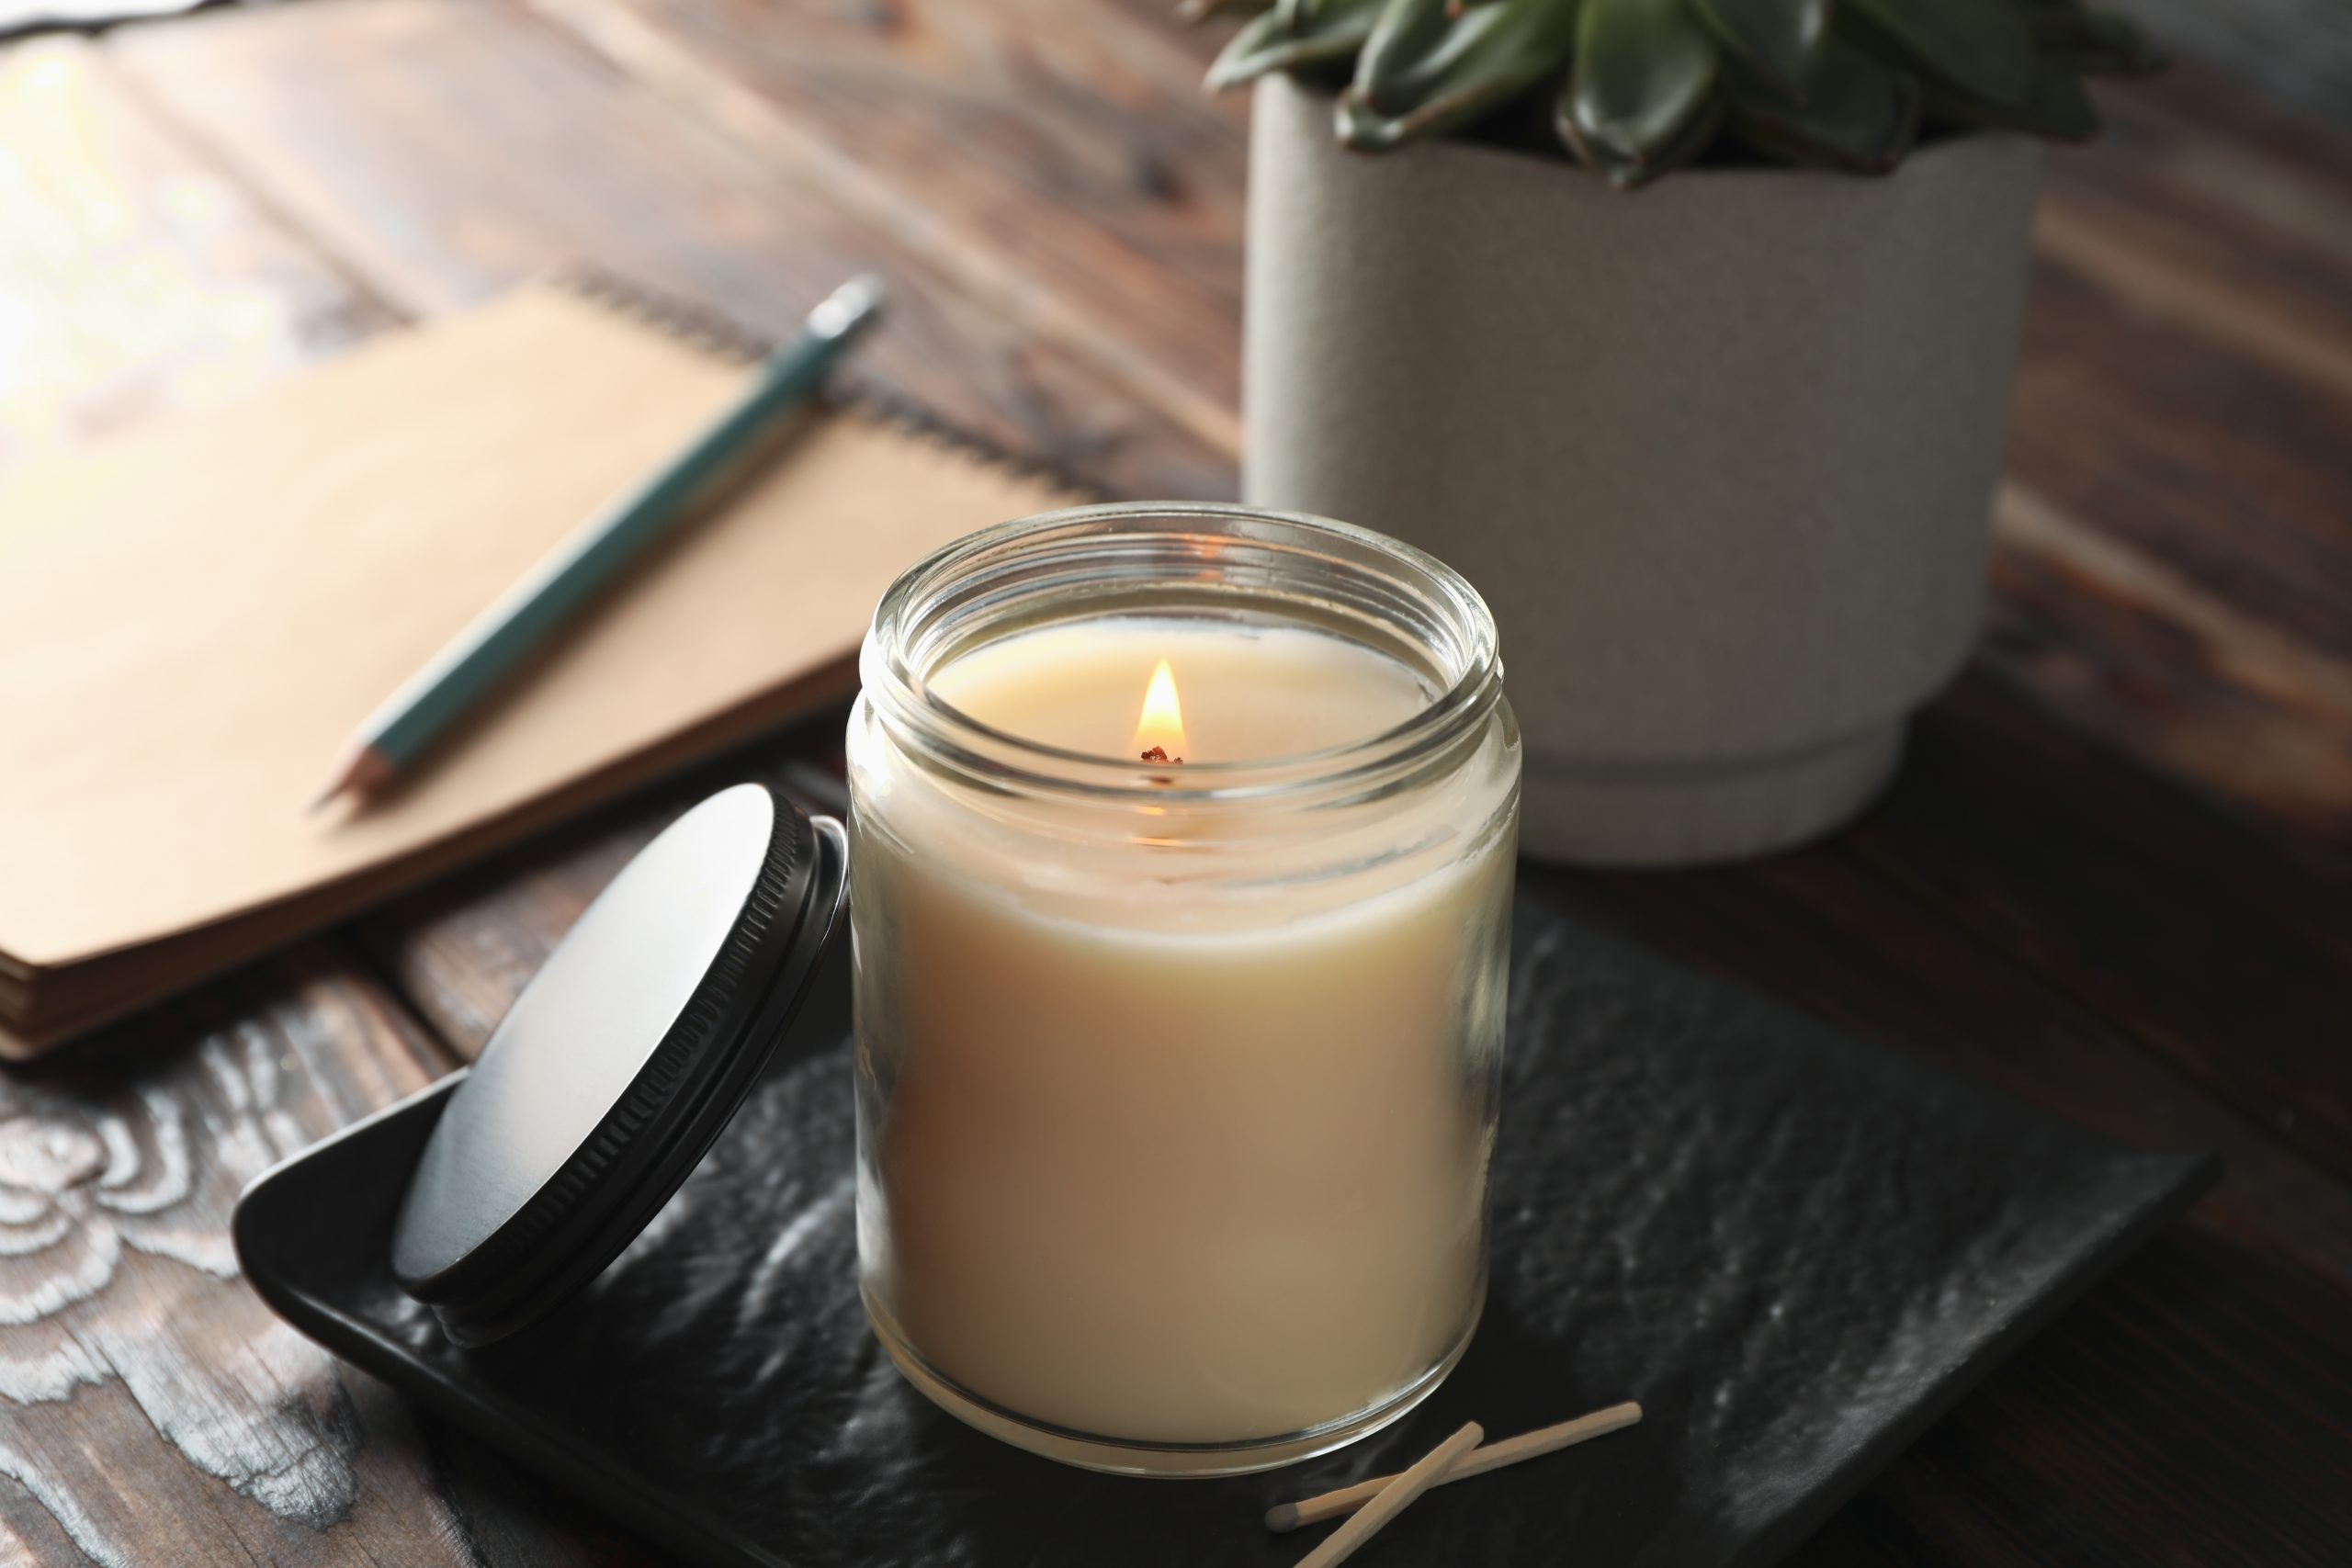 Homemade Soy Candles with Essential Oils - The House & Homestead